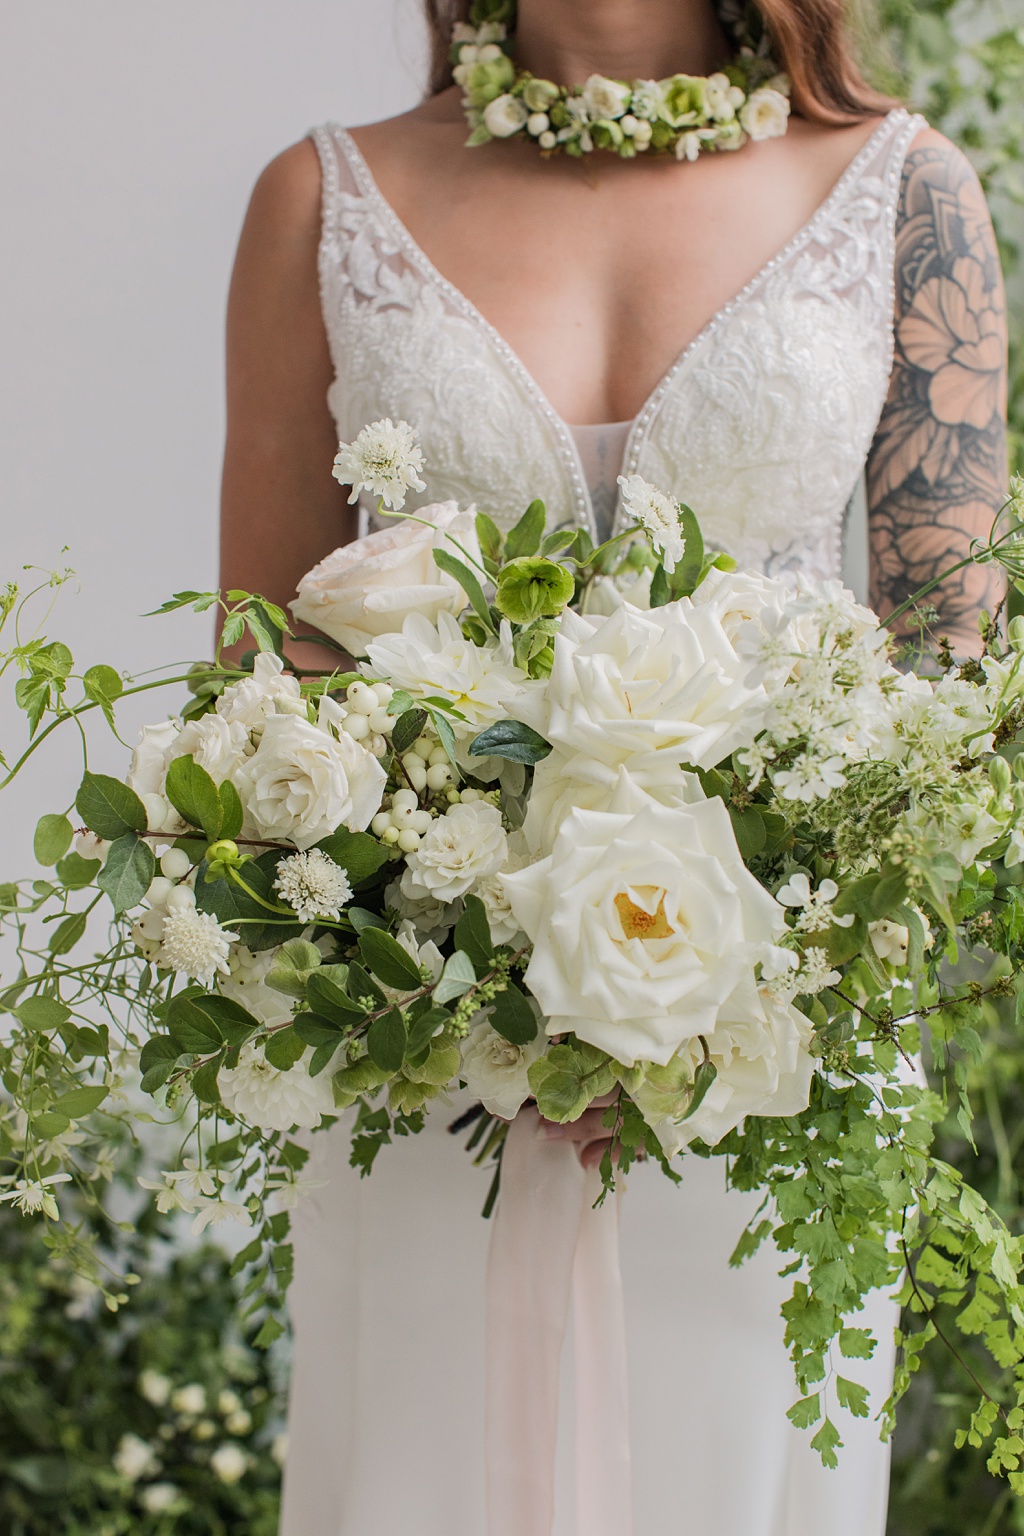 a white wedding bouquet being held by a bride, containing scabiosa